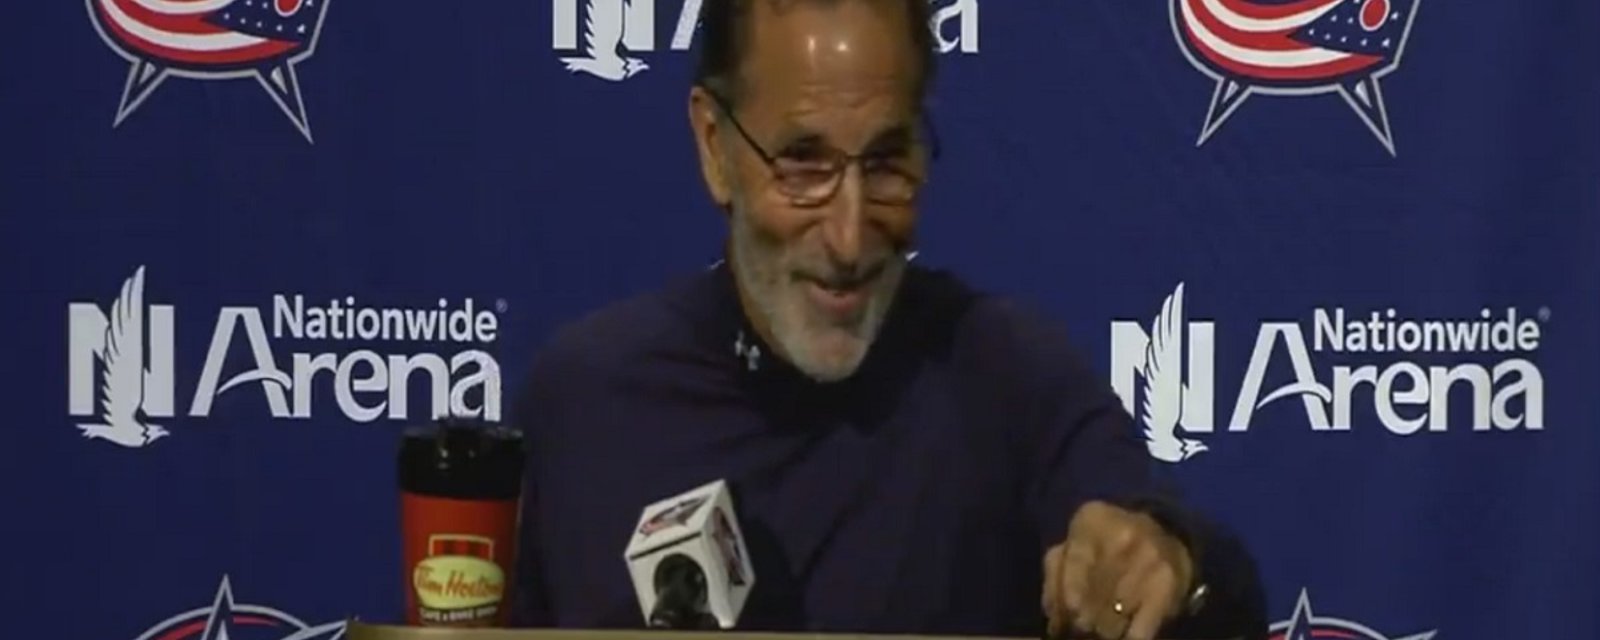 John Tortorella almost swears but holds himself back in hilarious press conference.